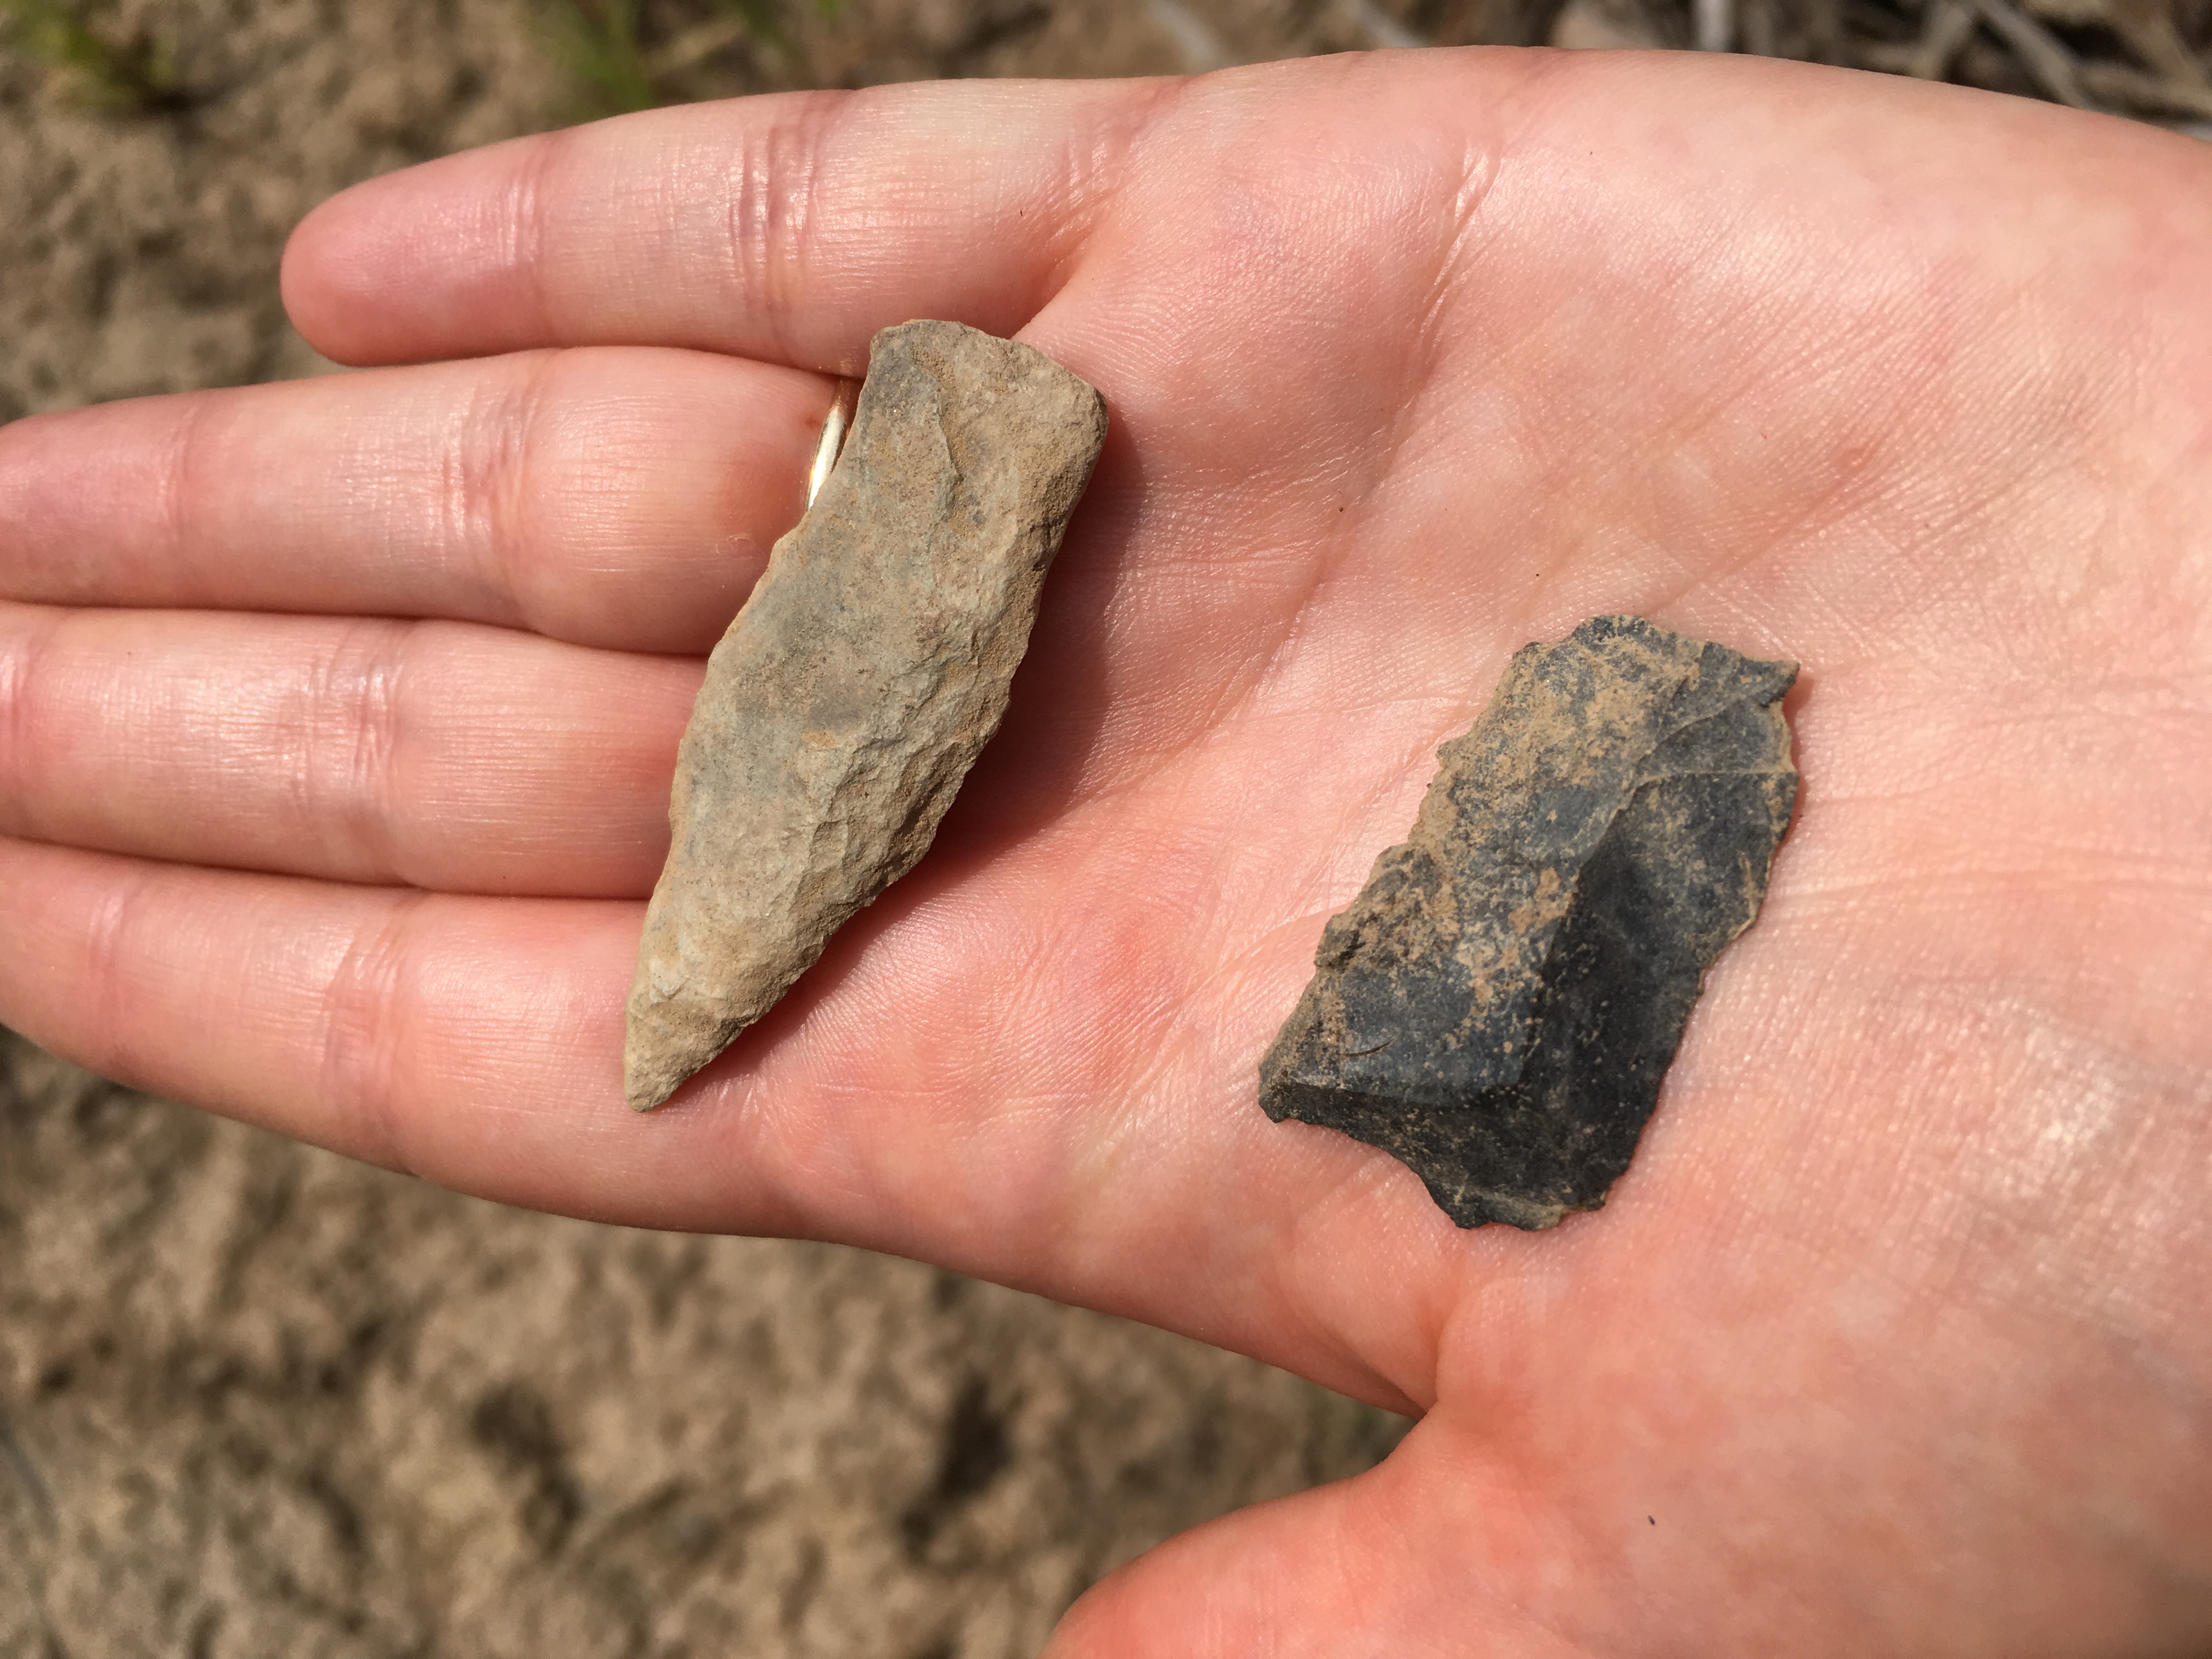 Two stone artifacts in a person's hand.